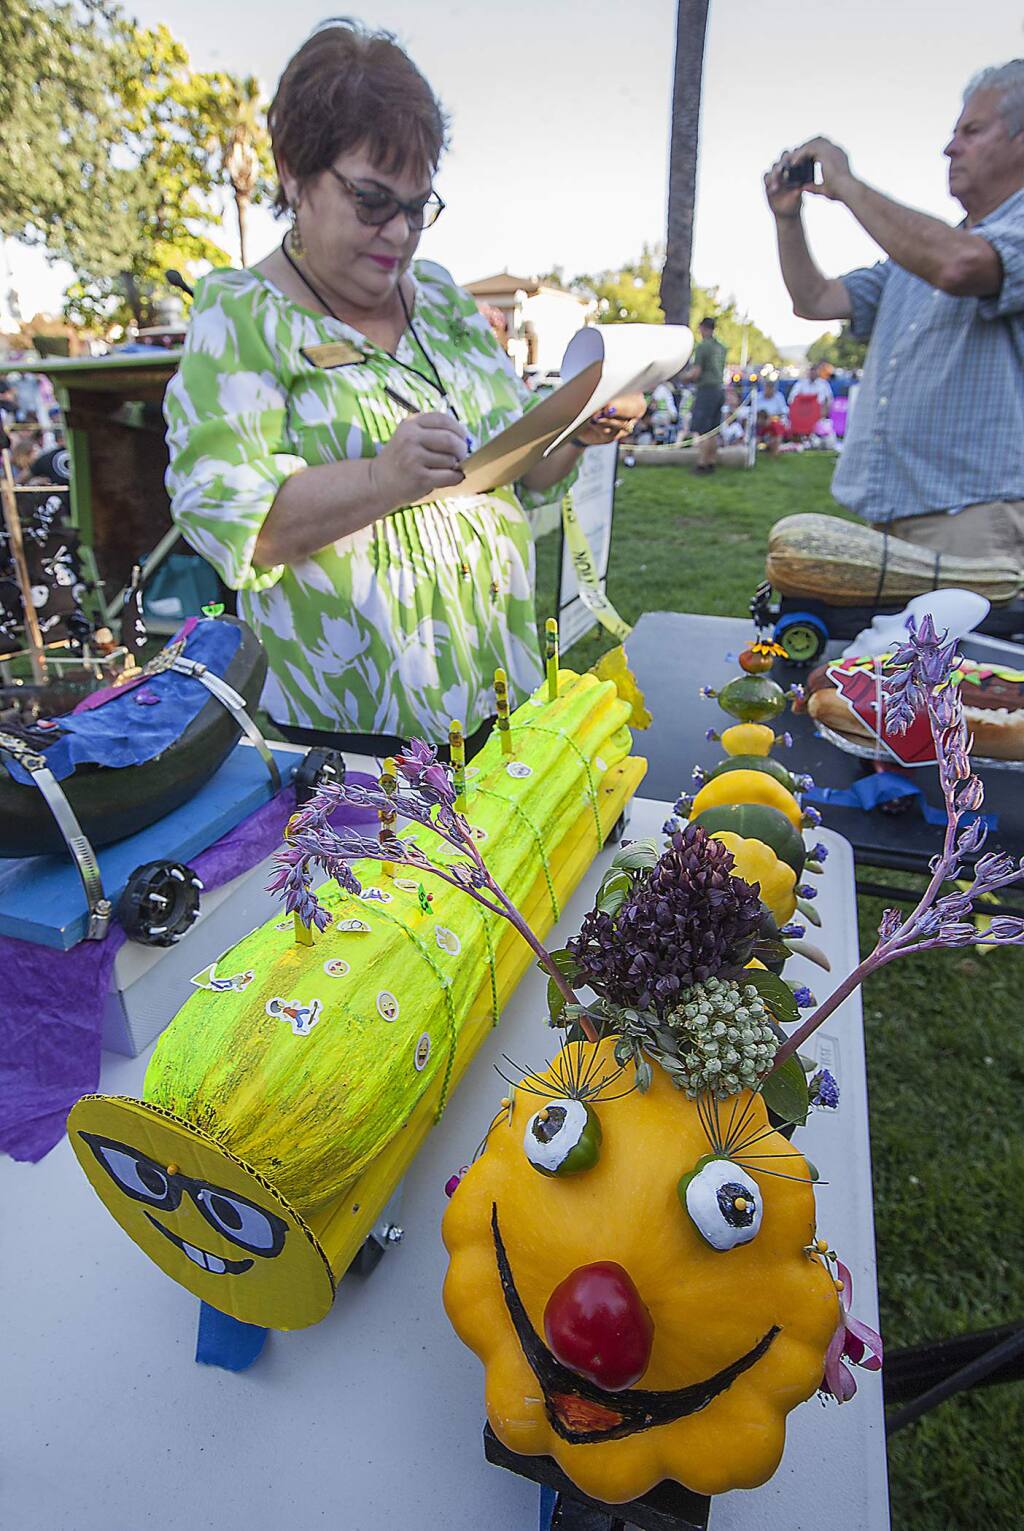 The annual, much-anticipated zucchini races were held at Tuesday's farmers market on Sonoma Plaza. Before the races began, the participating zukes were on display, much to the delight of the event's spectators. (Photos by Robbi Pengelly/Index-Tribune)